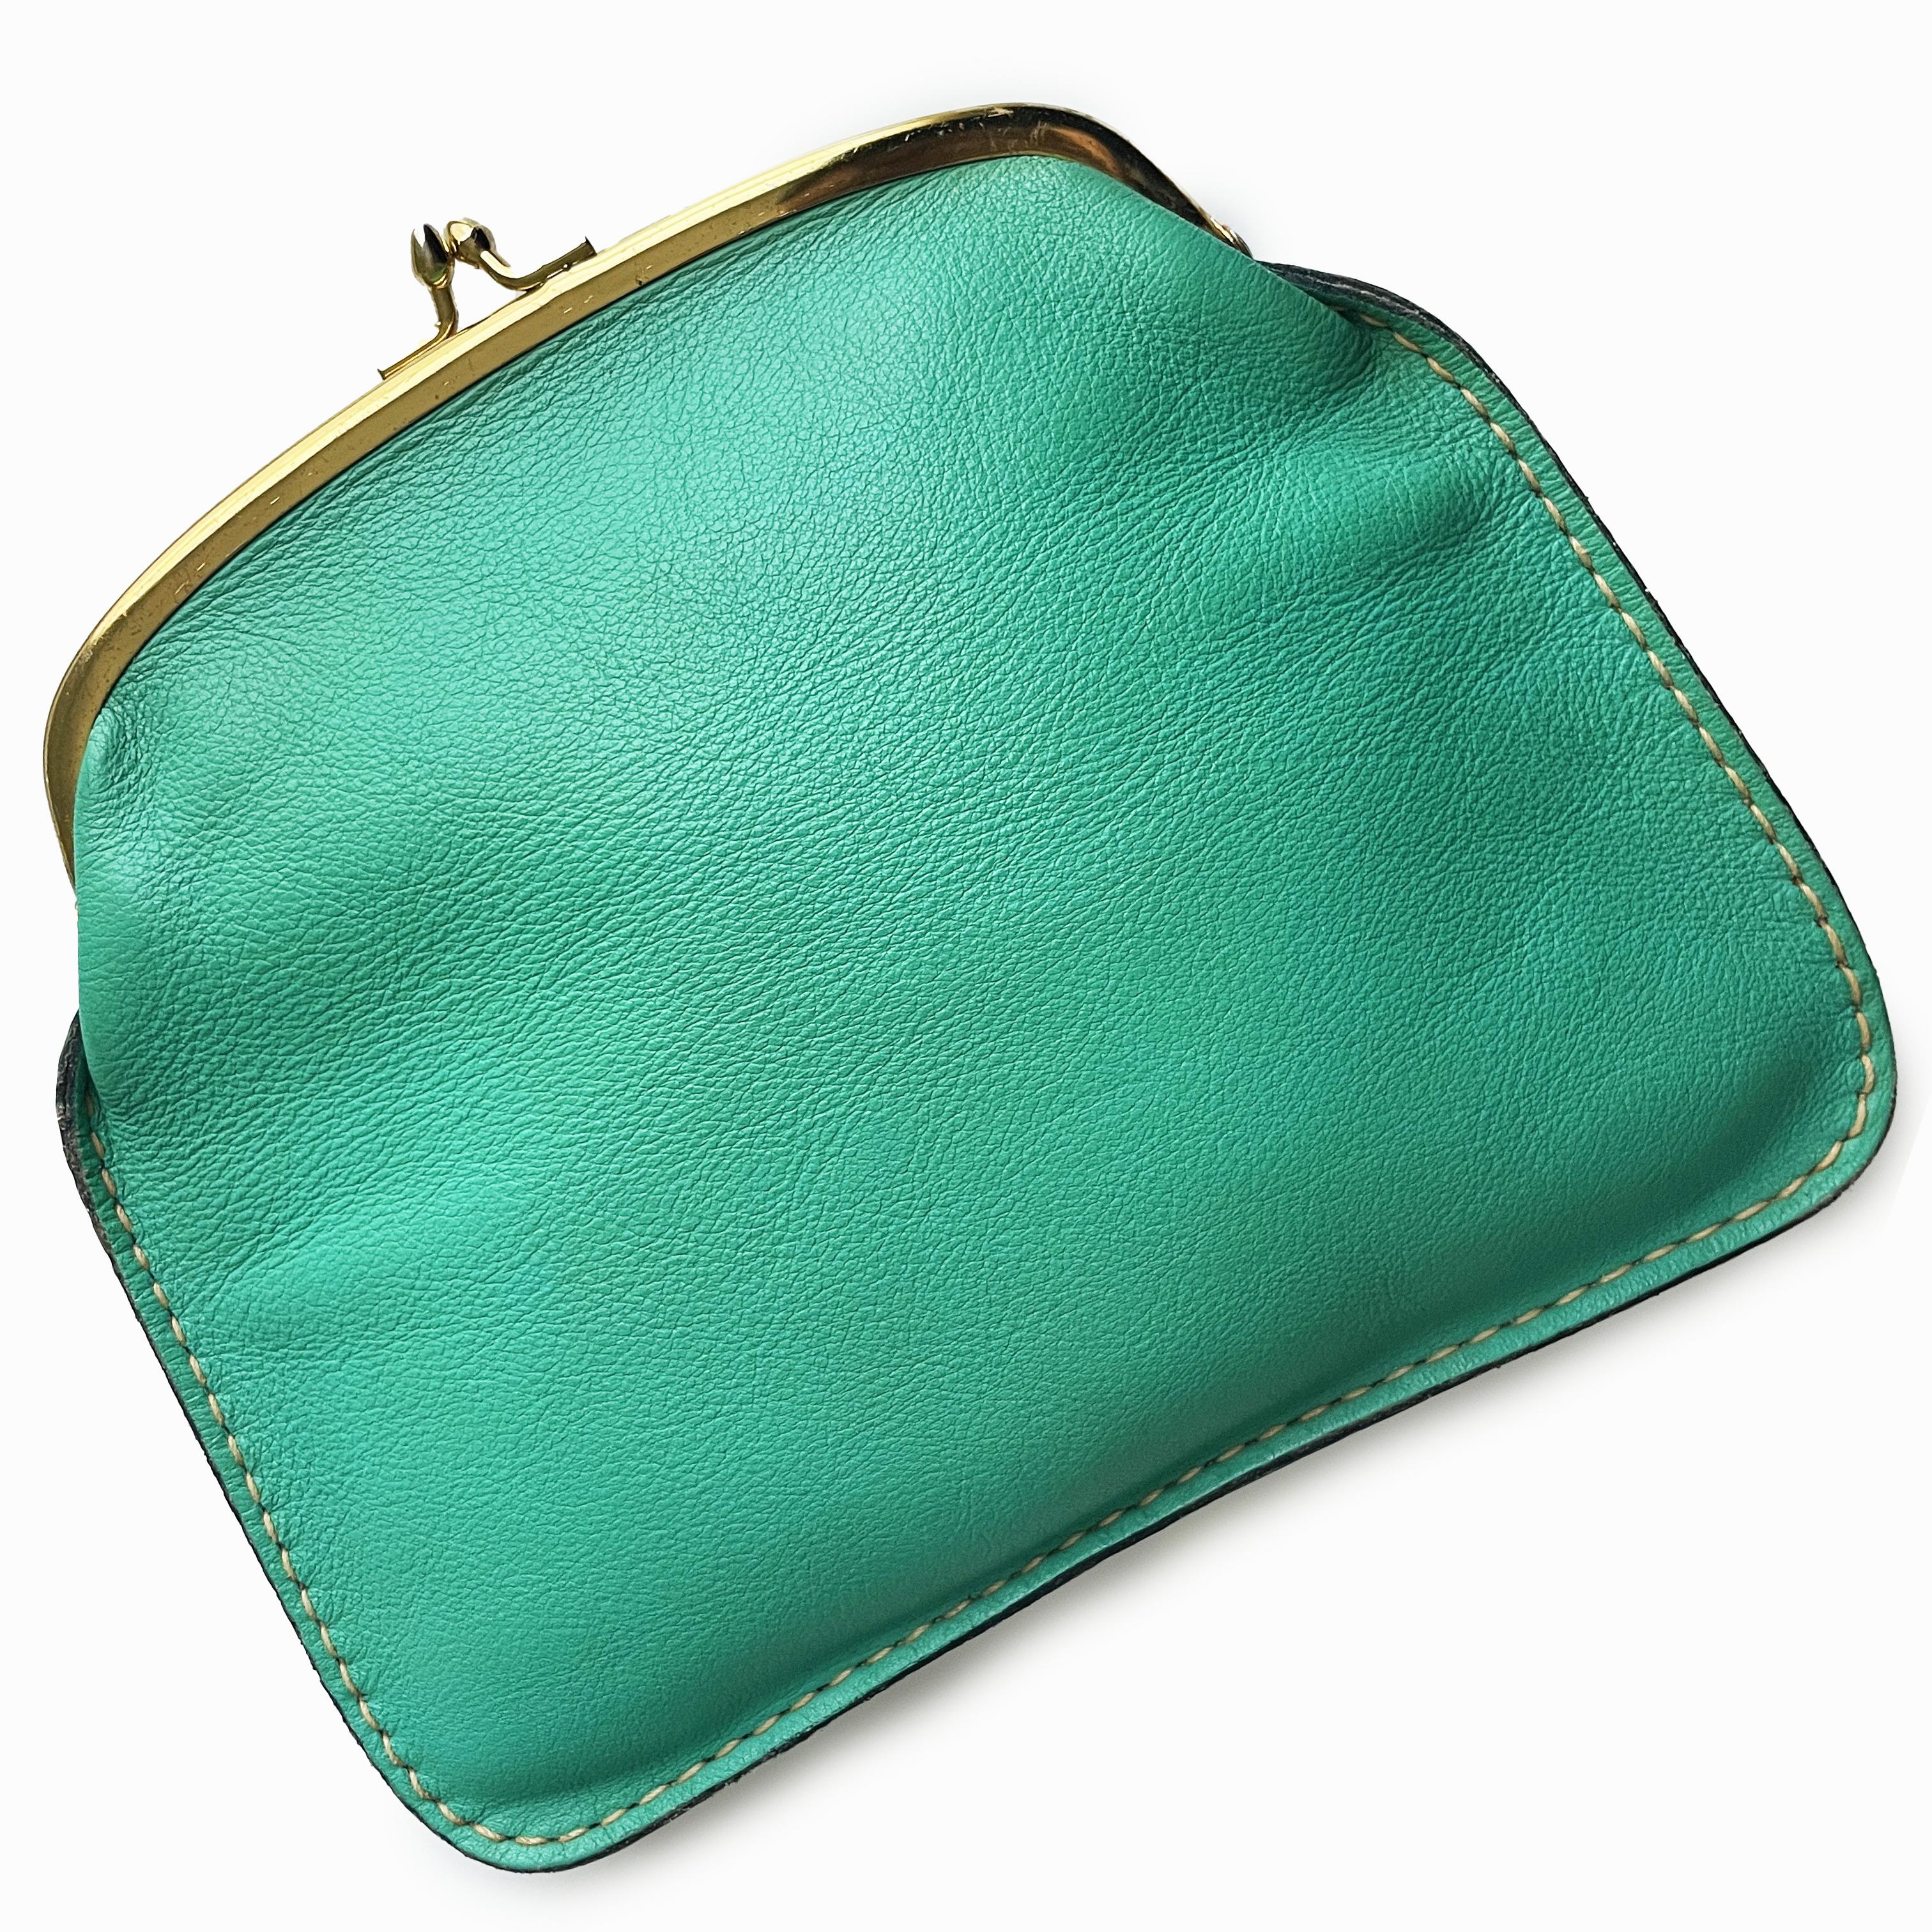 Bonnie Cashin for Coach Foldover Purse 60s Cashin Carry Mint Green Leather Rare In Good Condition For Sale In Port Saint Lucie, FL